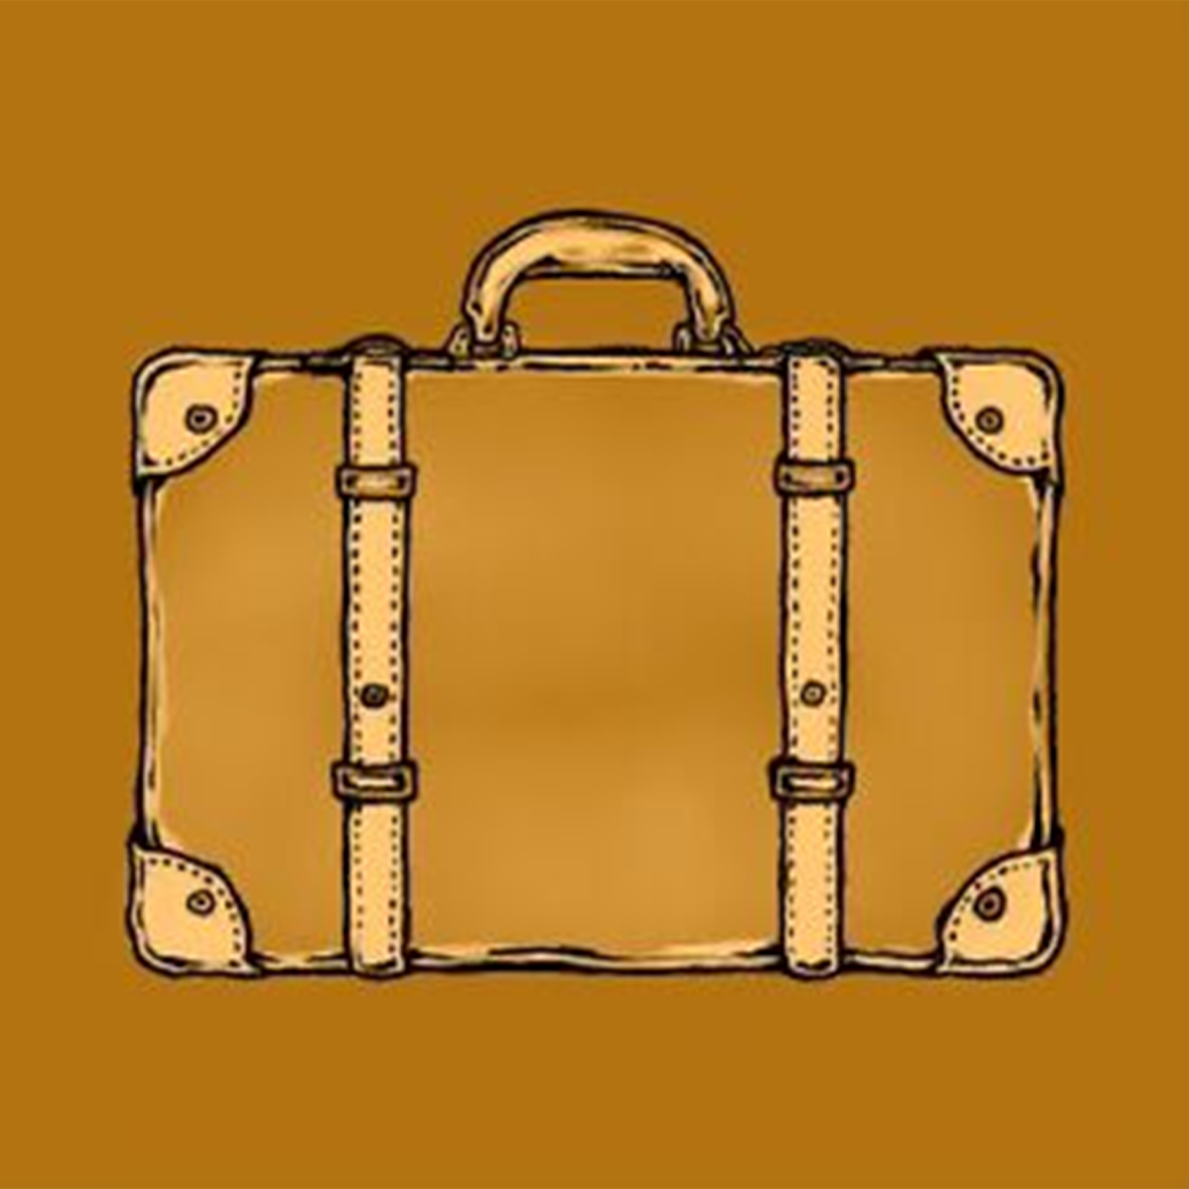 A orange-toned pen-and-ink drawing of a leather suitcase bound by buckled straps